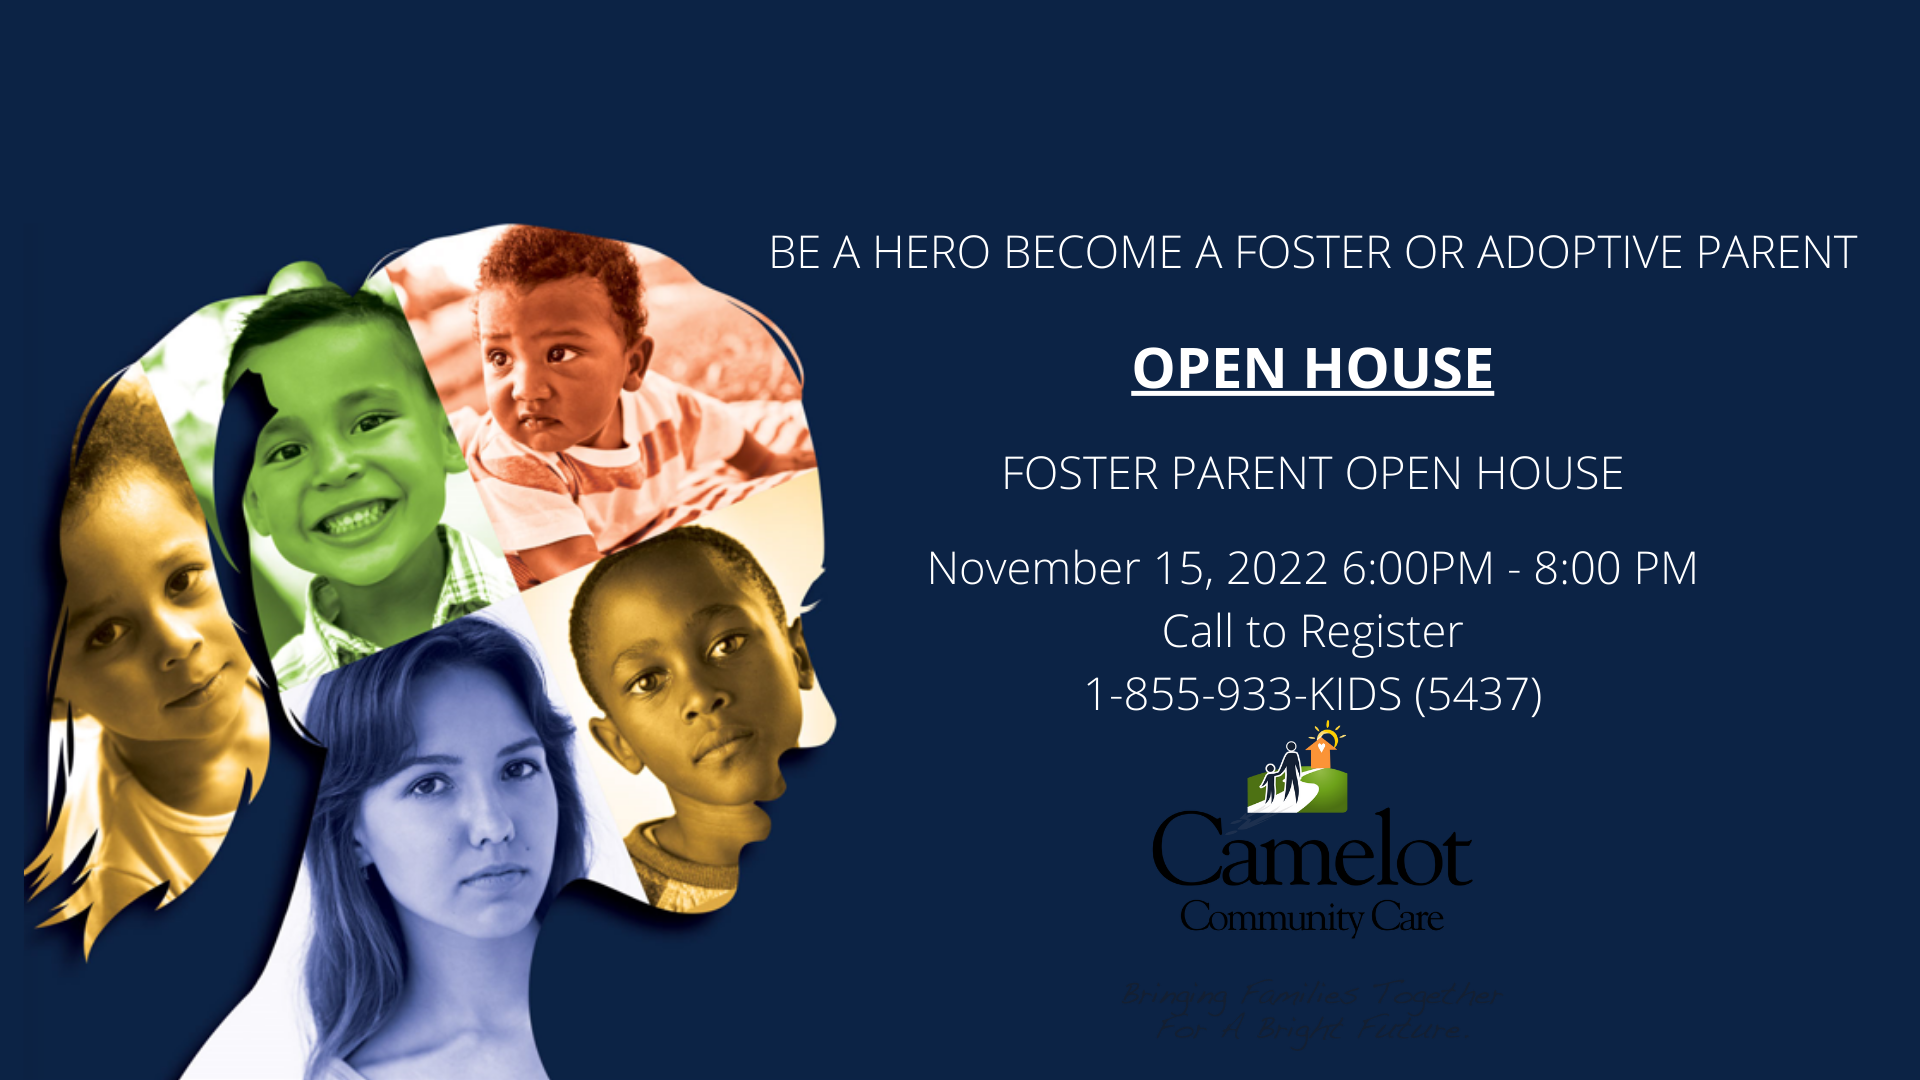 Open House Poster — One More Child